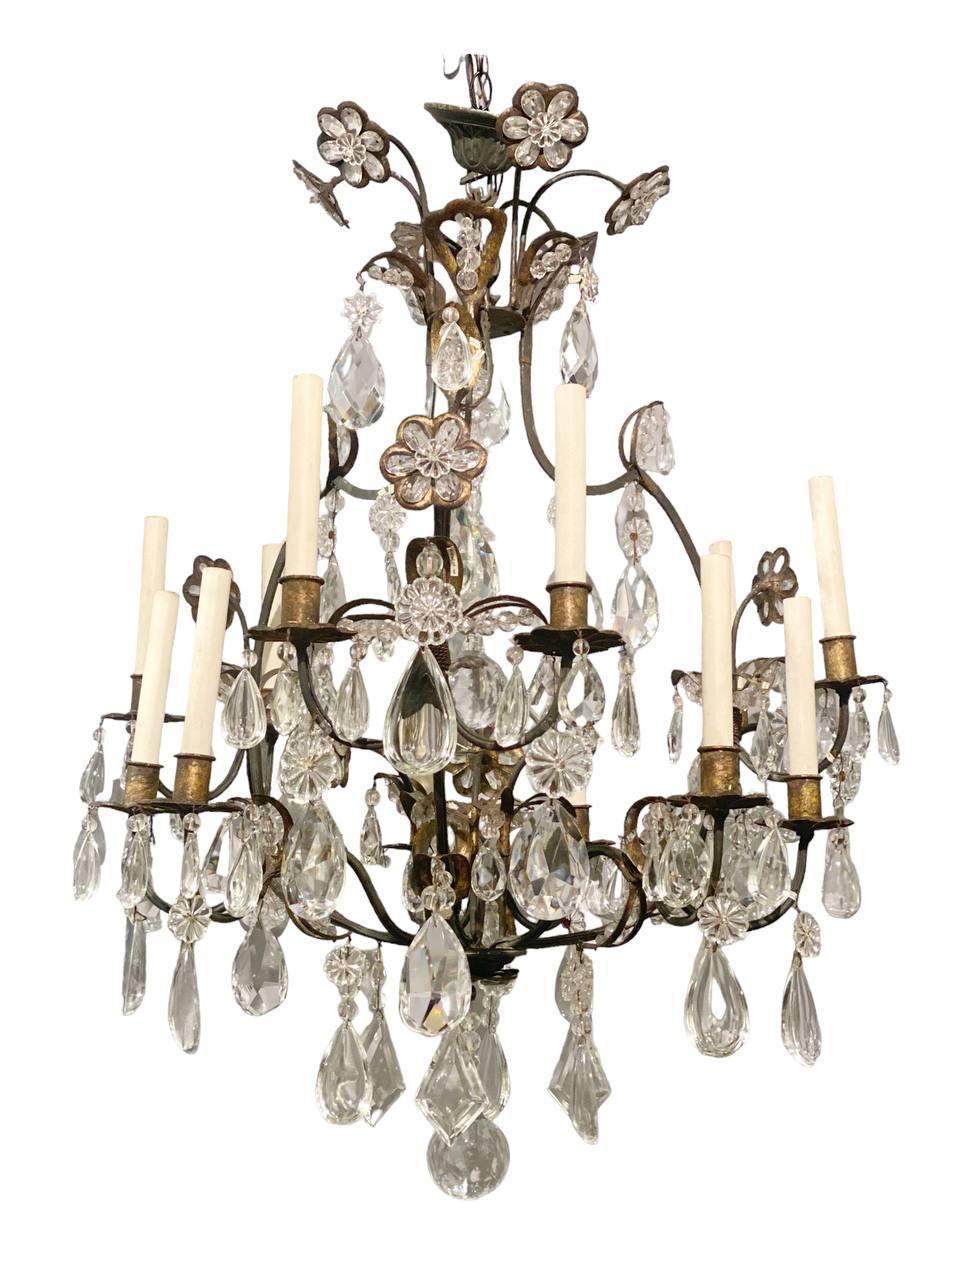 French Provincial 1930's French Gilt Metal and Crystal Chandelier with 12 lights For Sale